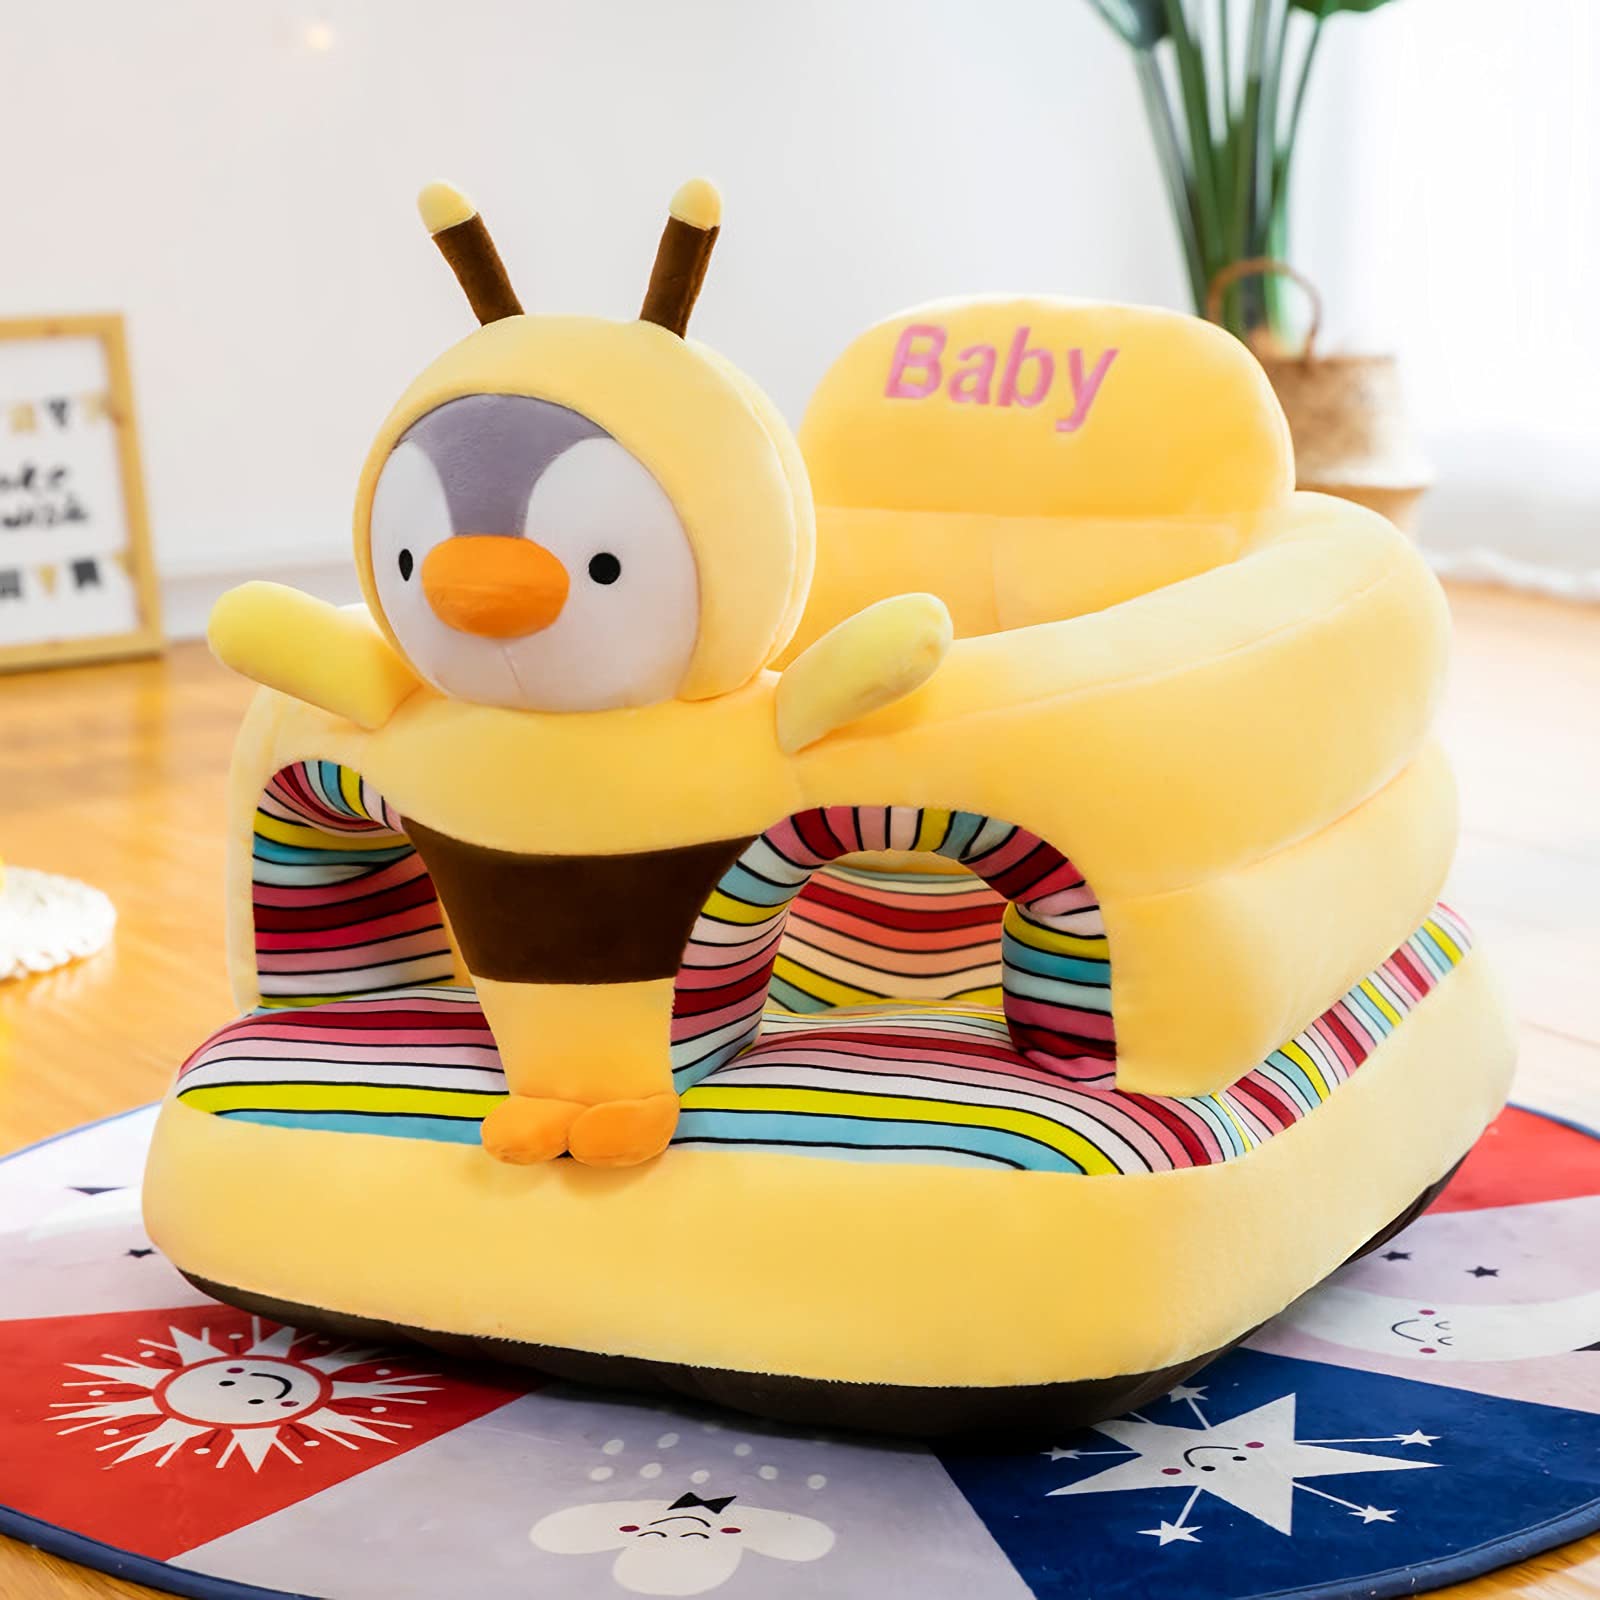 Baby Support Seat, Cute Baby Sofa Chair for Sitting Up, Comfy Plush Infant Seats (Penguin,W17.5 x H17.5)